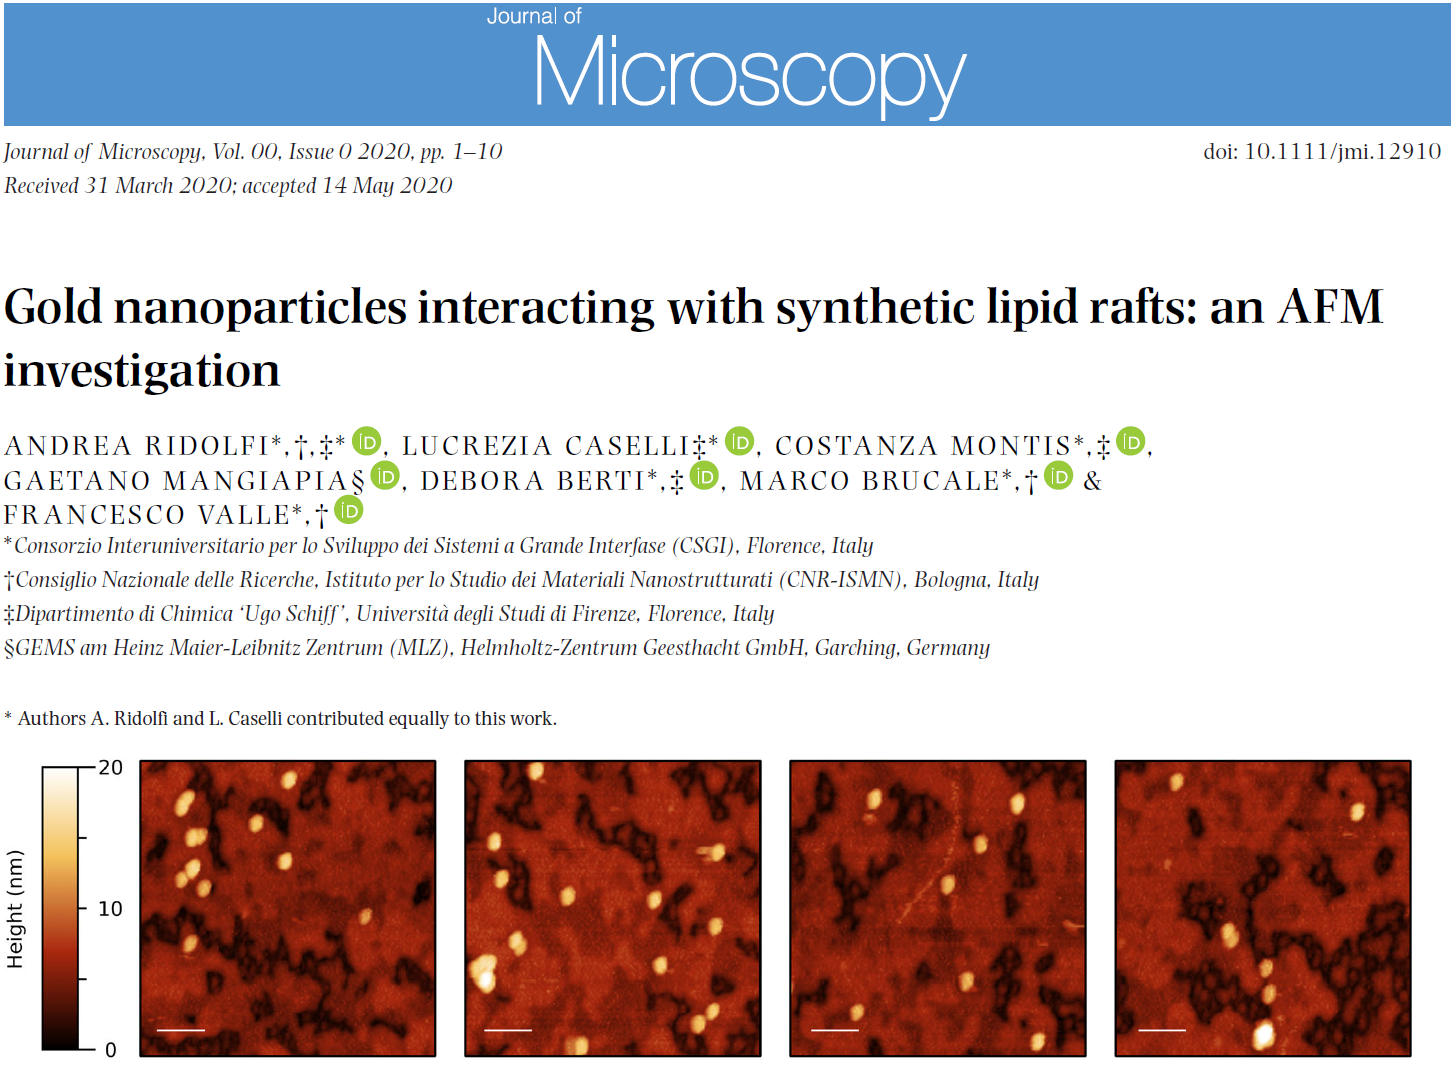 Paper: Gold nanoparticles interacting with synthetic lipid rafts: an AFM investigation